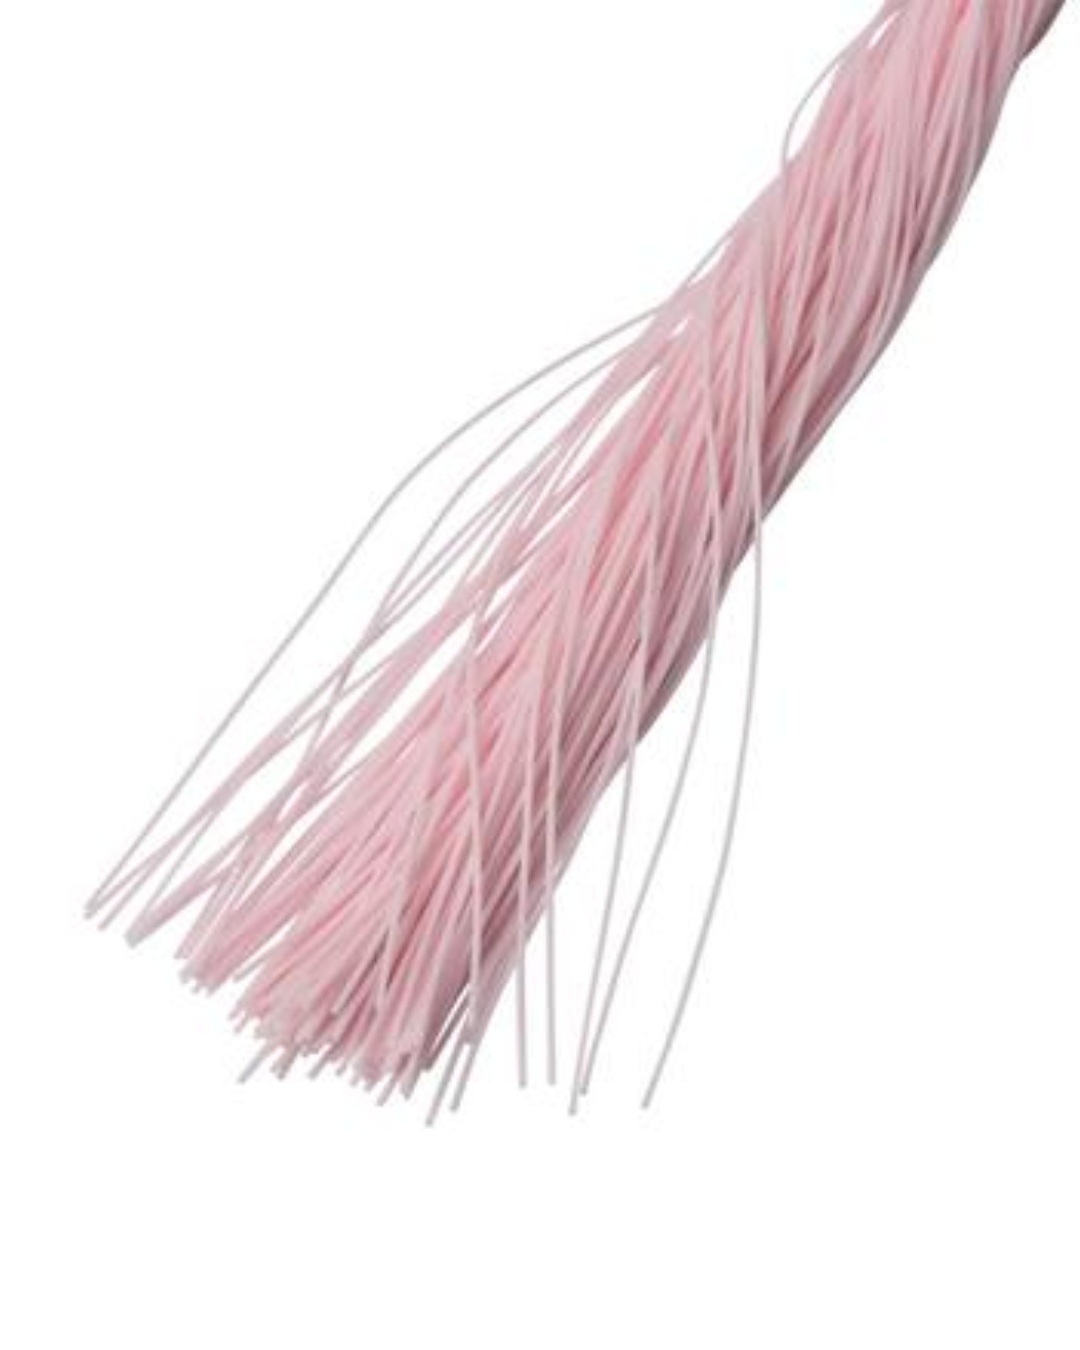 Sex & Mischief Whip & Tickle Feather Tickler & Whip - Pink & White close up of whip end